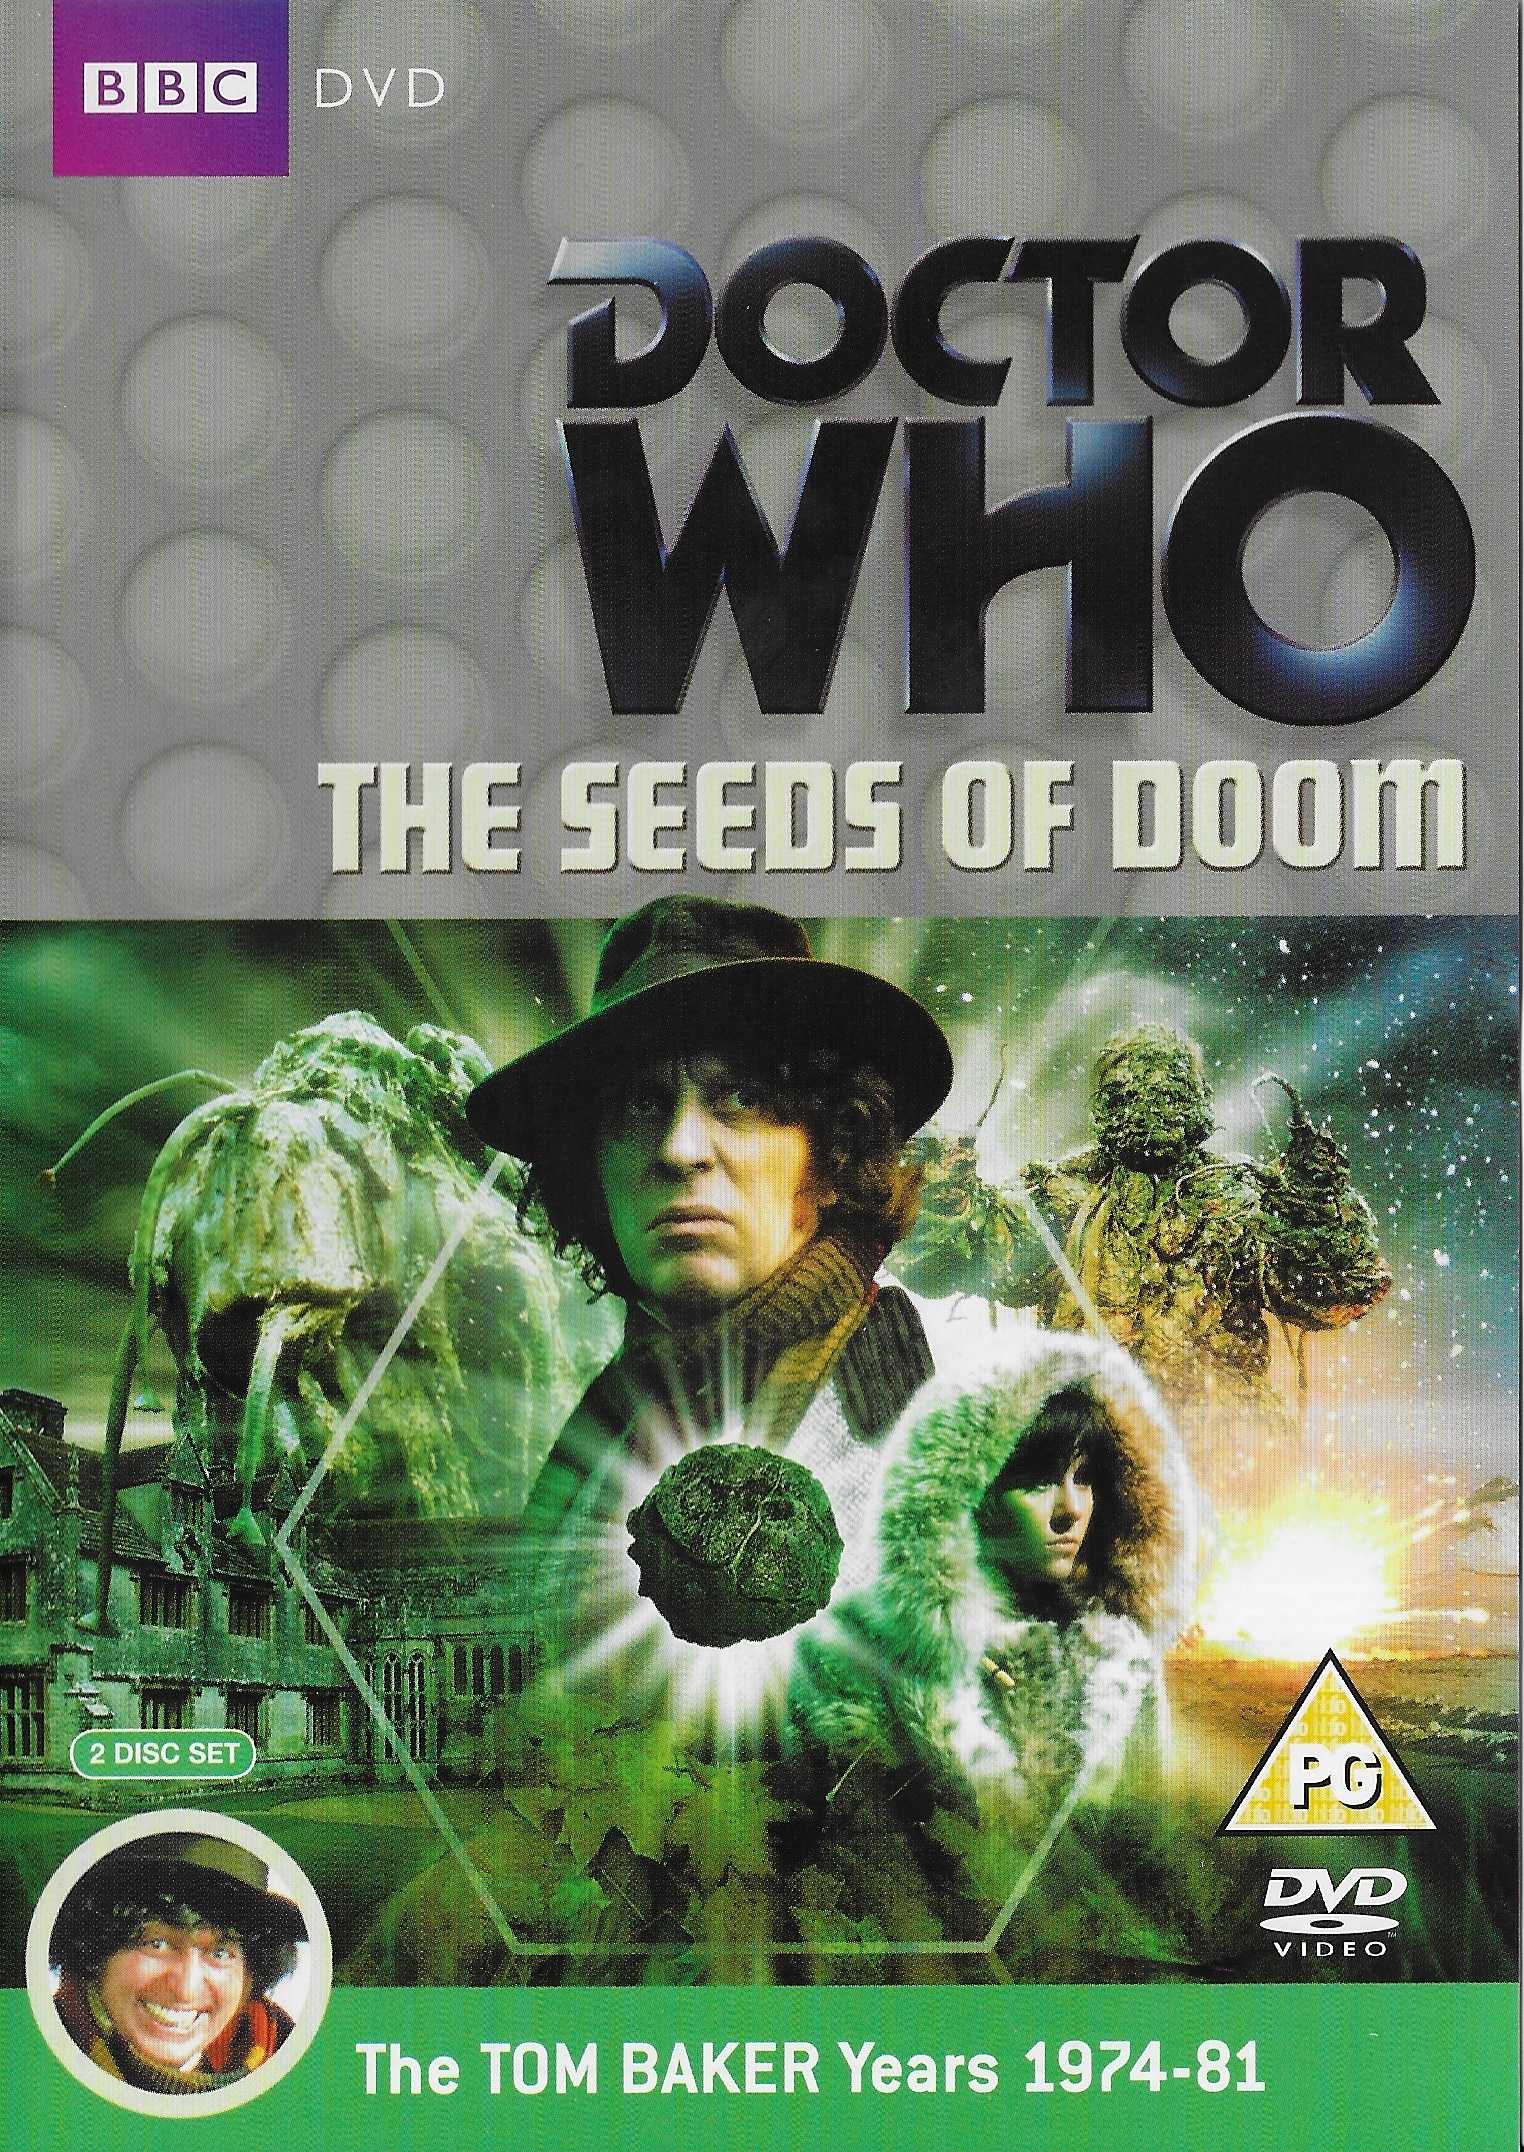 Picture of BBCDVD 3044 Doctor Who - The seeds of doom by artist Robert Banks Stewart from the BBC records and Tapes library